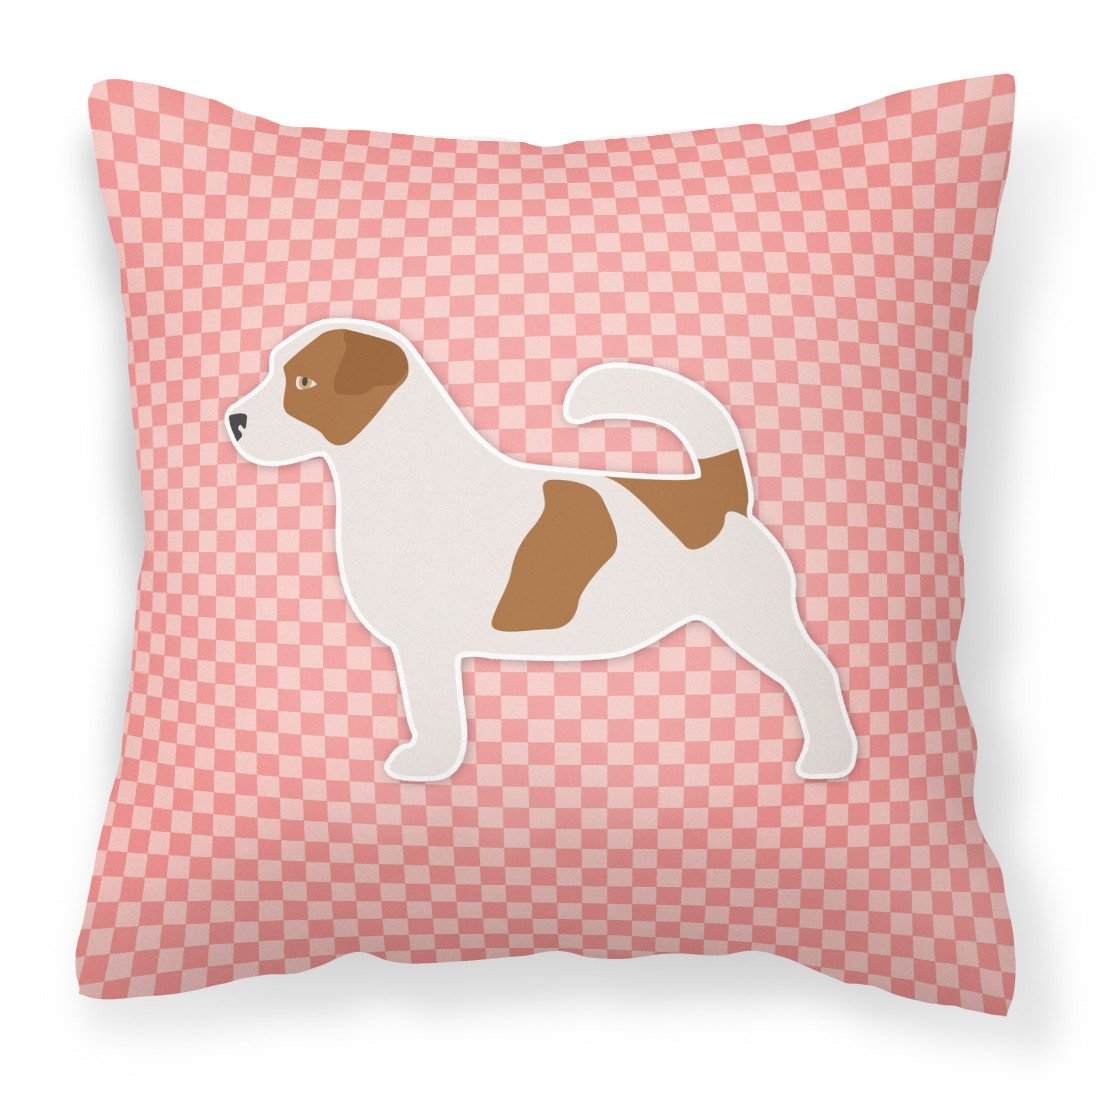 Jack Russell Terrier Checkerboard Pink Fabric Decorative Pillow BB3607PW1818 by Caroline's Treasures